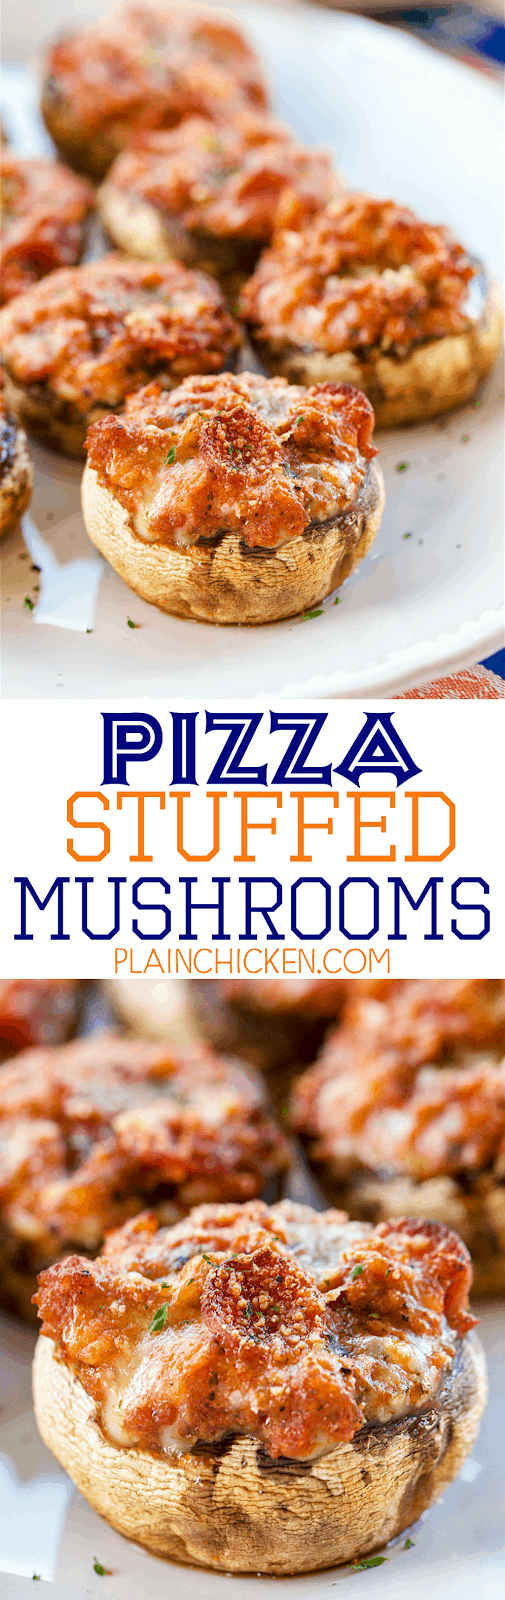 Pizza Stuffed Mushrooms -SO GOOD! Mushroom caps stuffed with sausage, pepperoni, pizza sauce, basil, garlic, mozzarella and parmesan. Feel free to add your favorite toppings. Ready to eat in 15 minutes. Great for parties, tailgating or a low-carb lunch or dinner!!